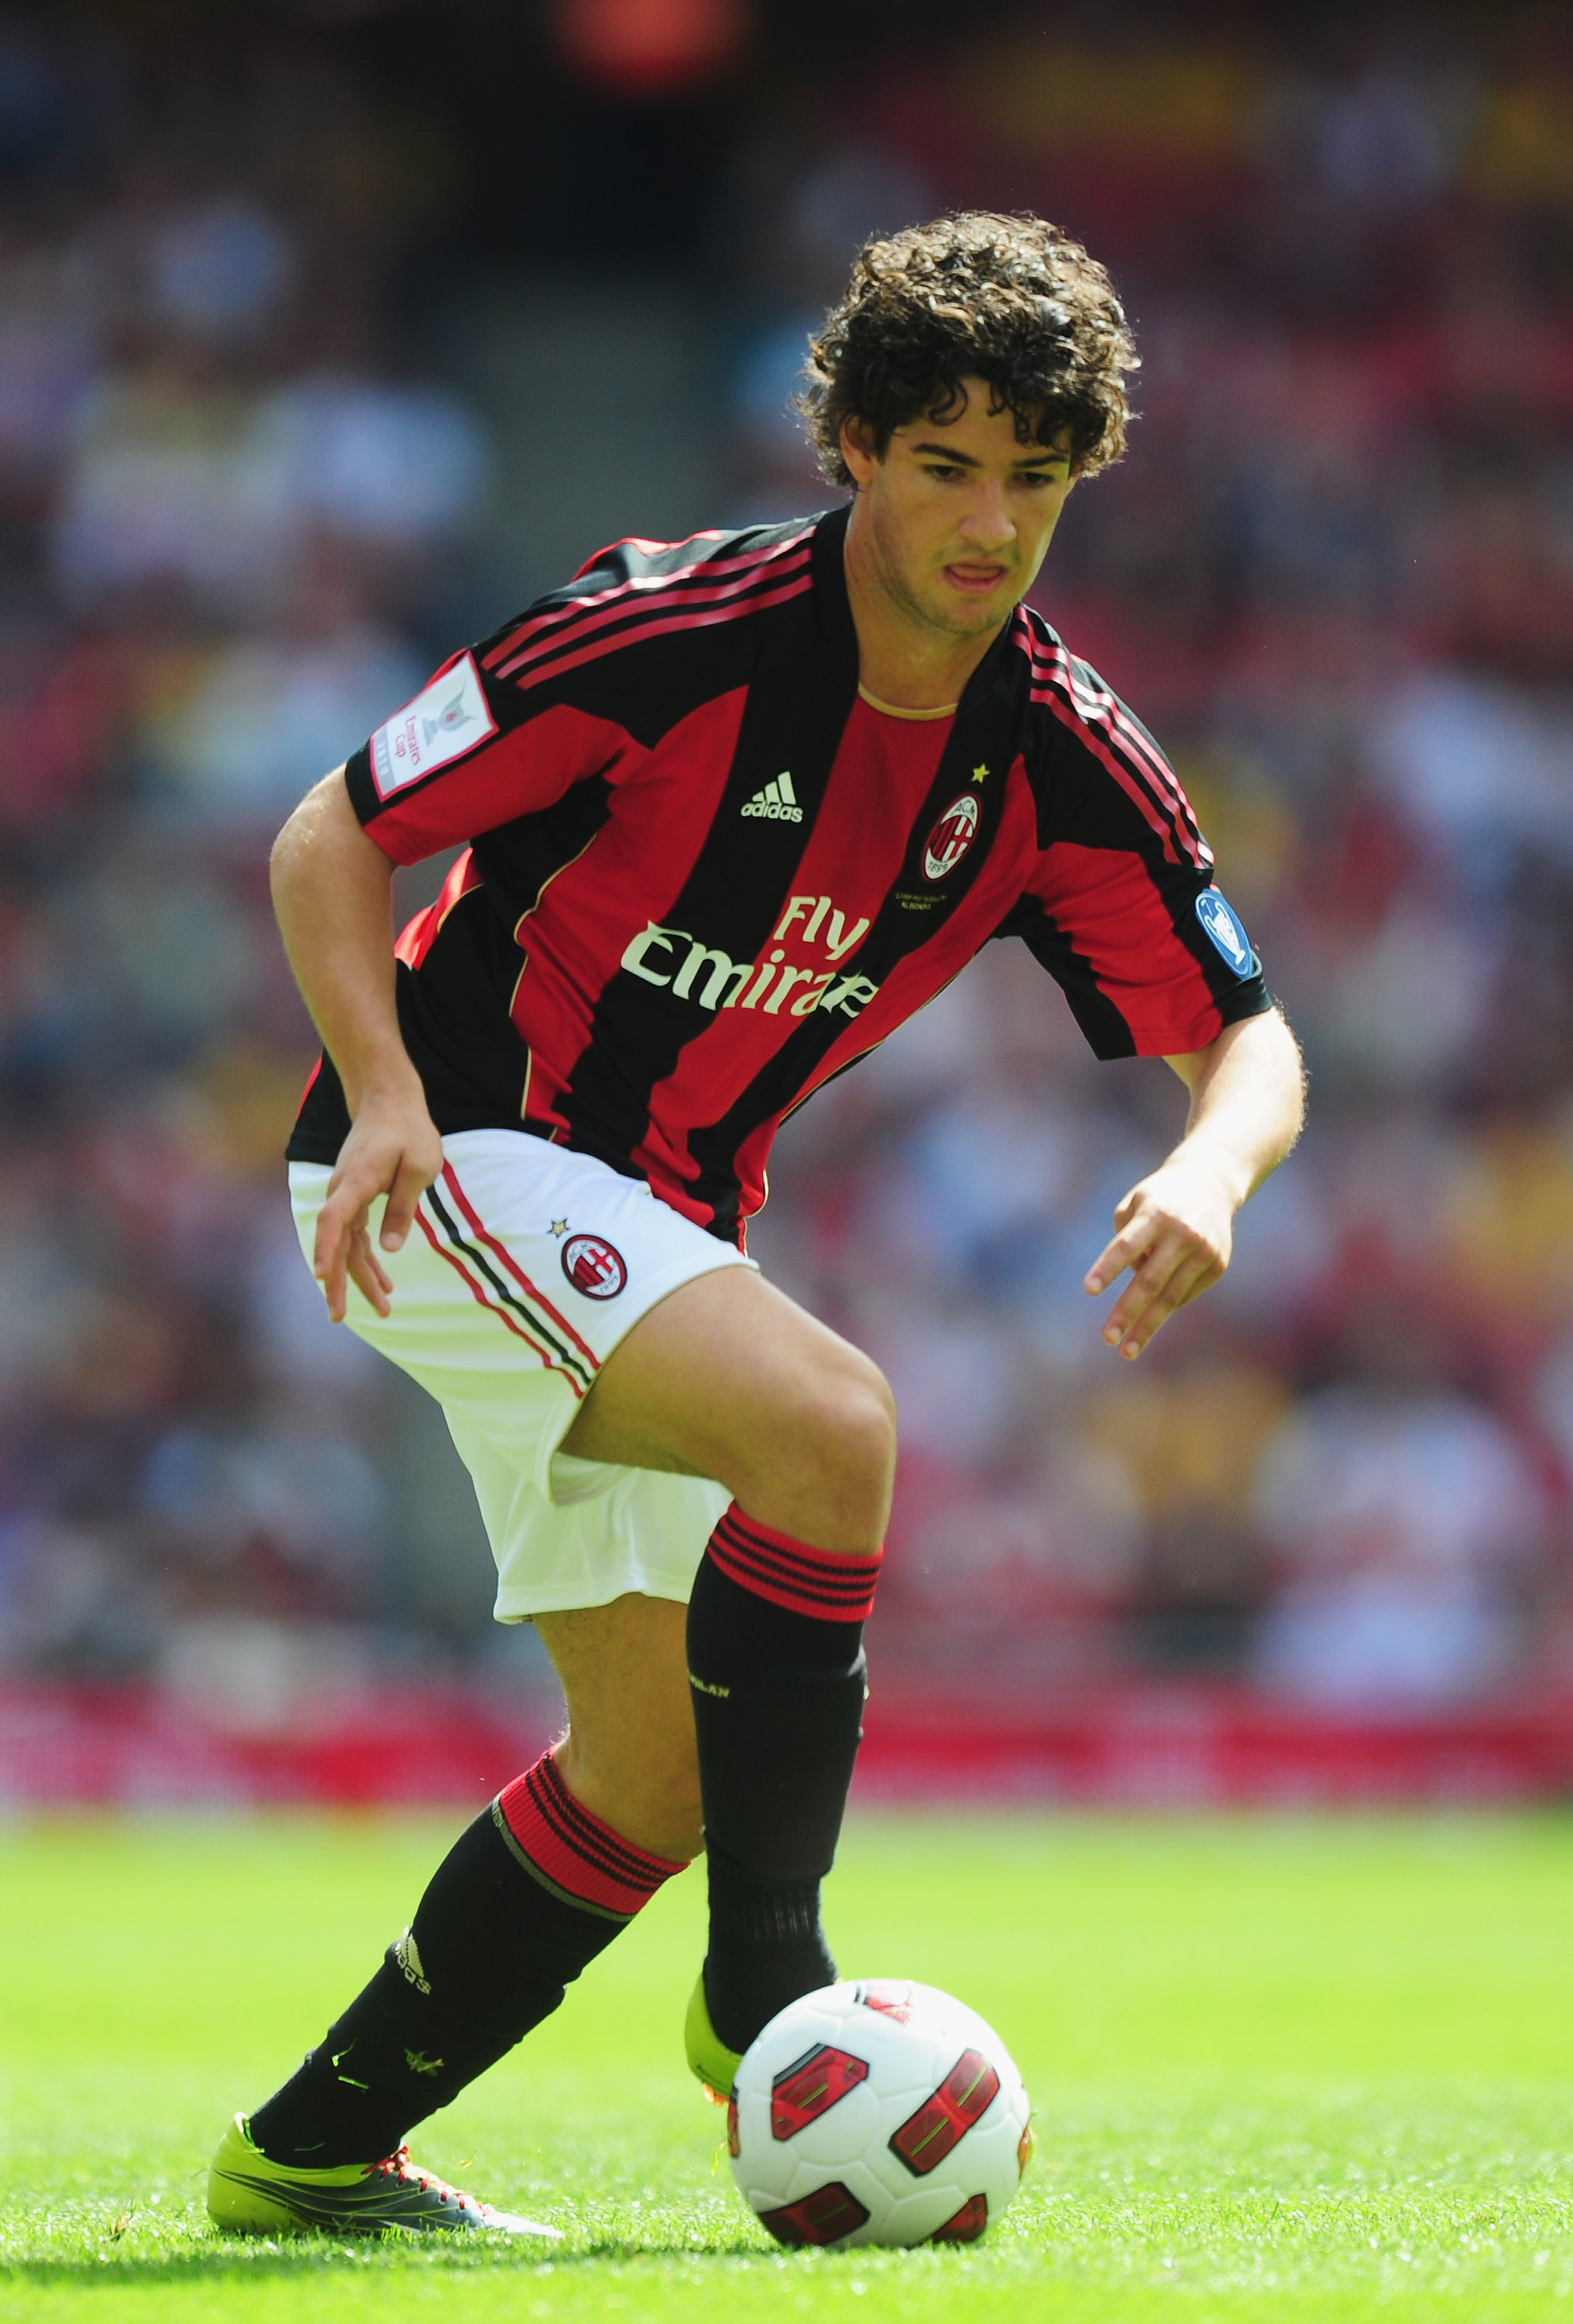 LONDON, ENGLAND - AUGUST 01:  Pato of AC Milan in action during the Emirates Cup match between AC Milan and Lyon at Emirates Stadium on August 1, 2010 in London, England.  (Photo by Mike Hewitt/Getty Images)